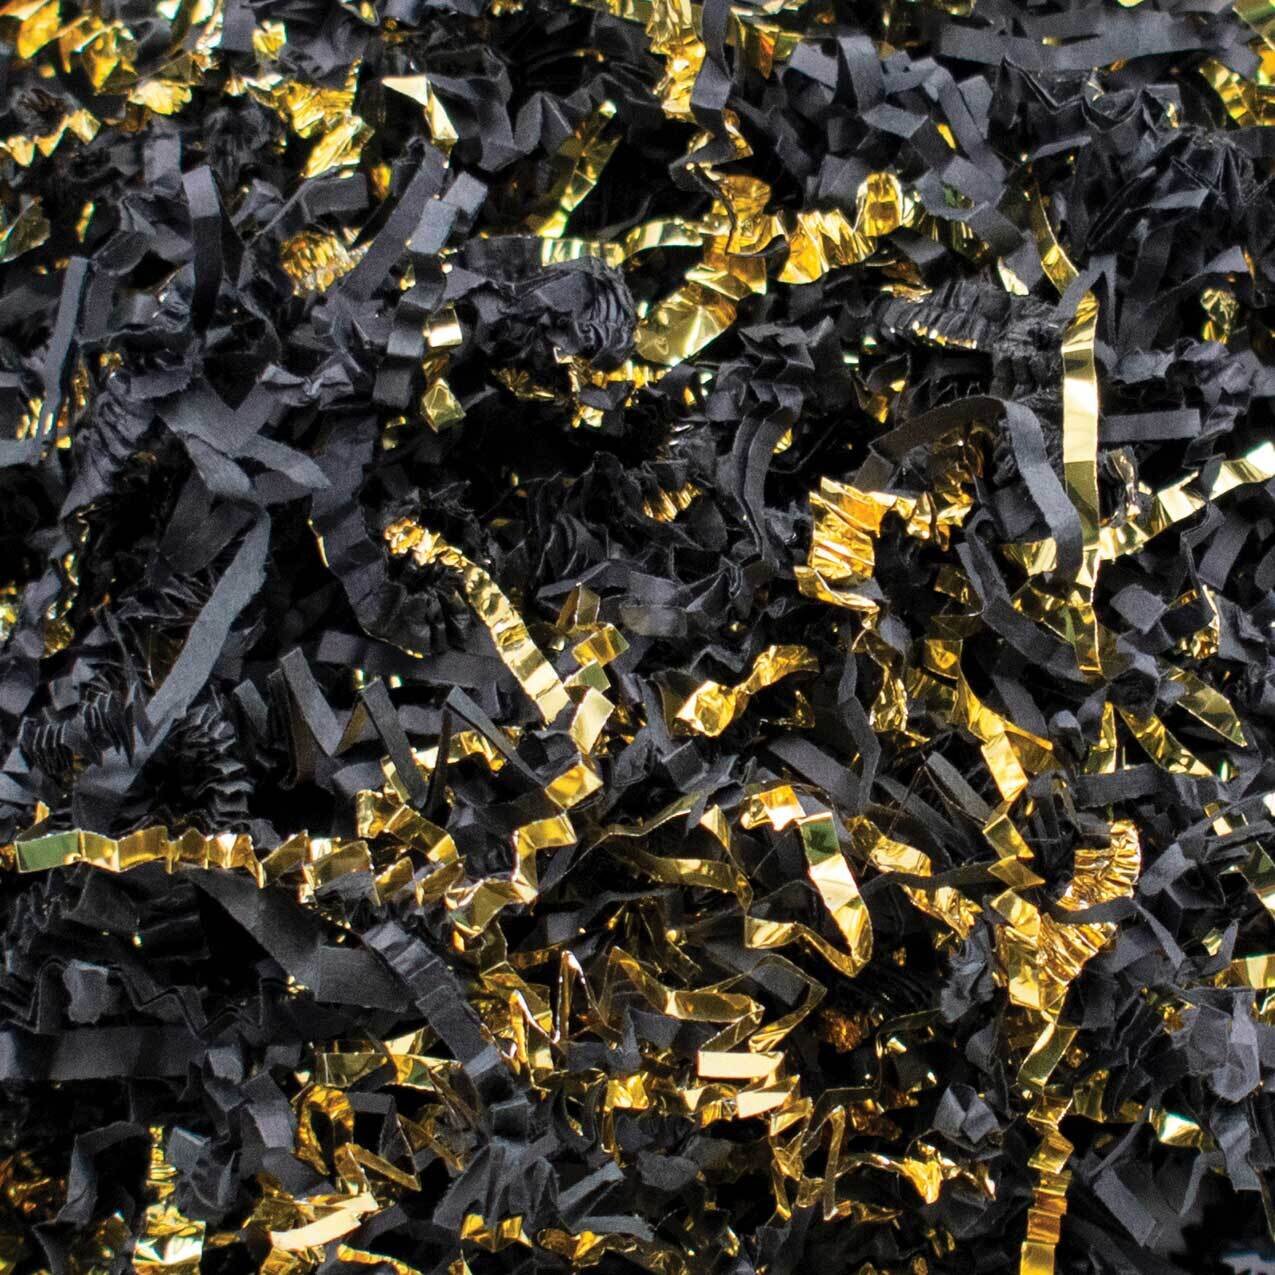 Black and Gold Metallic Color Mixed Crinkle Cut Shredded Paper JT5109-BKGD